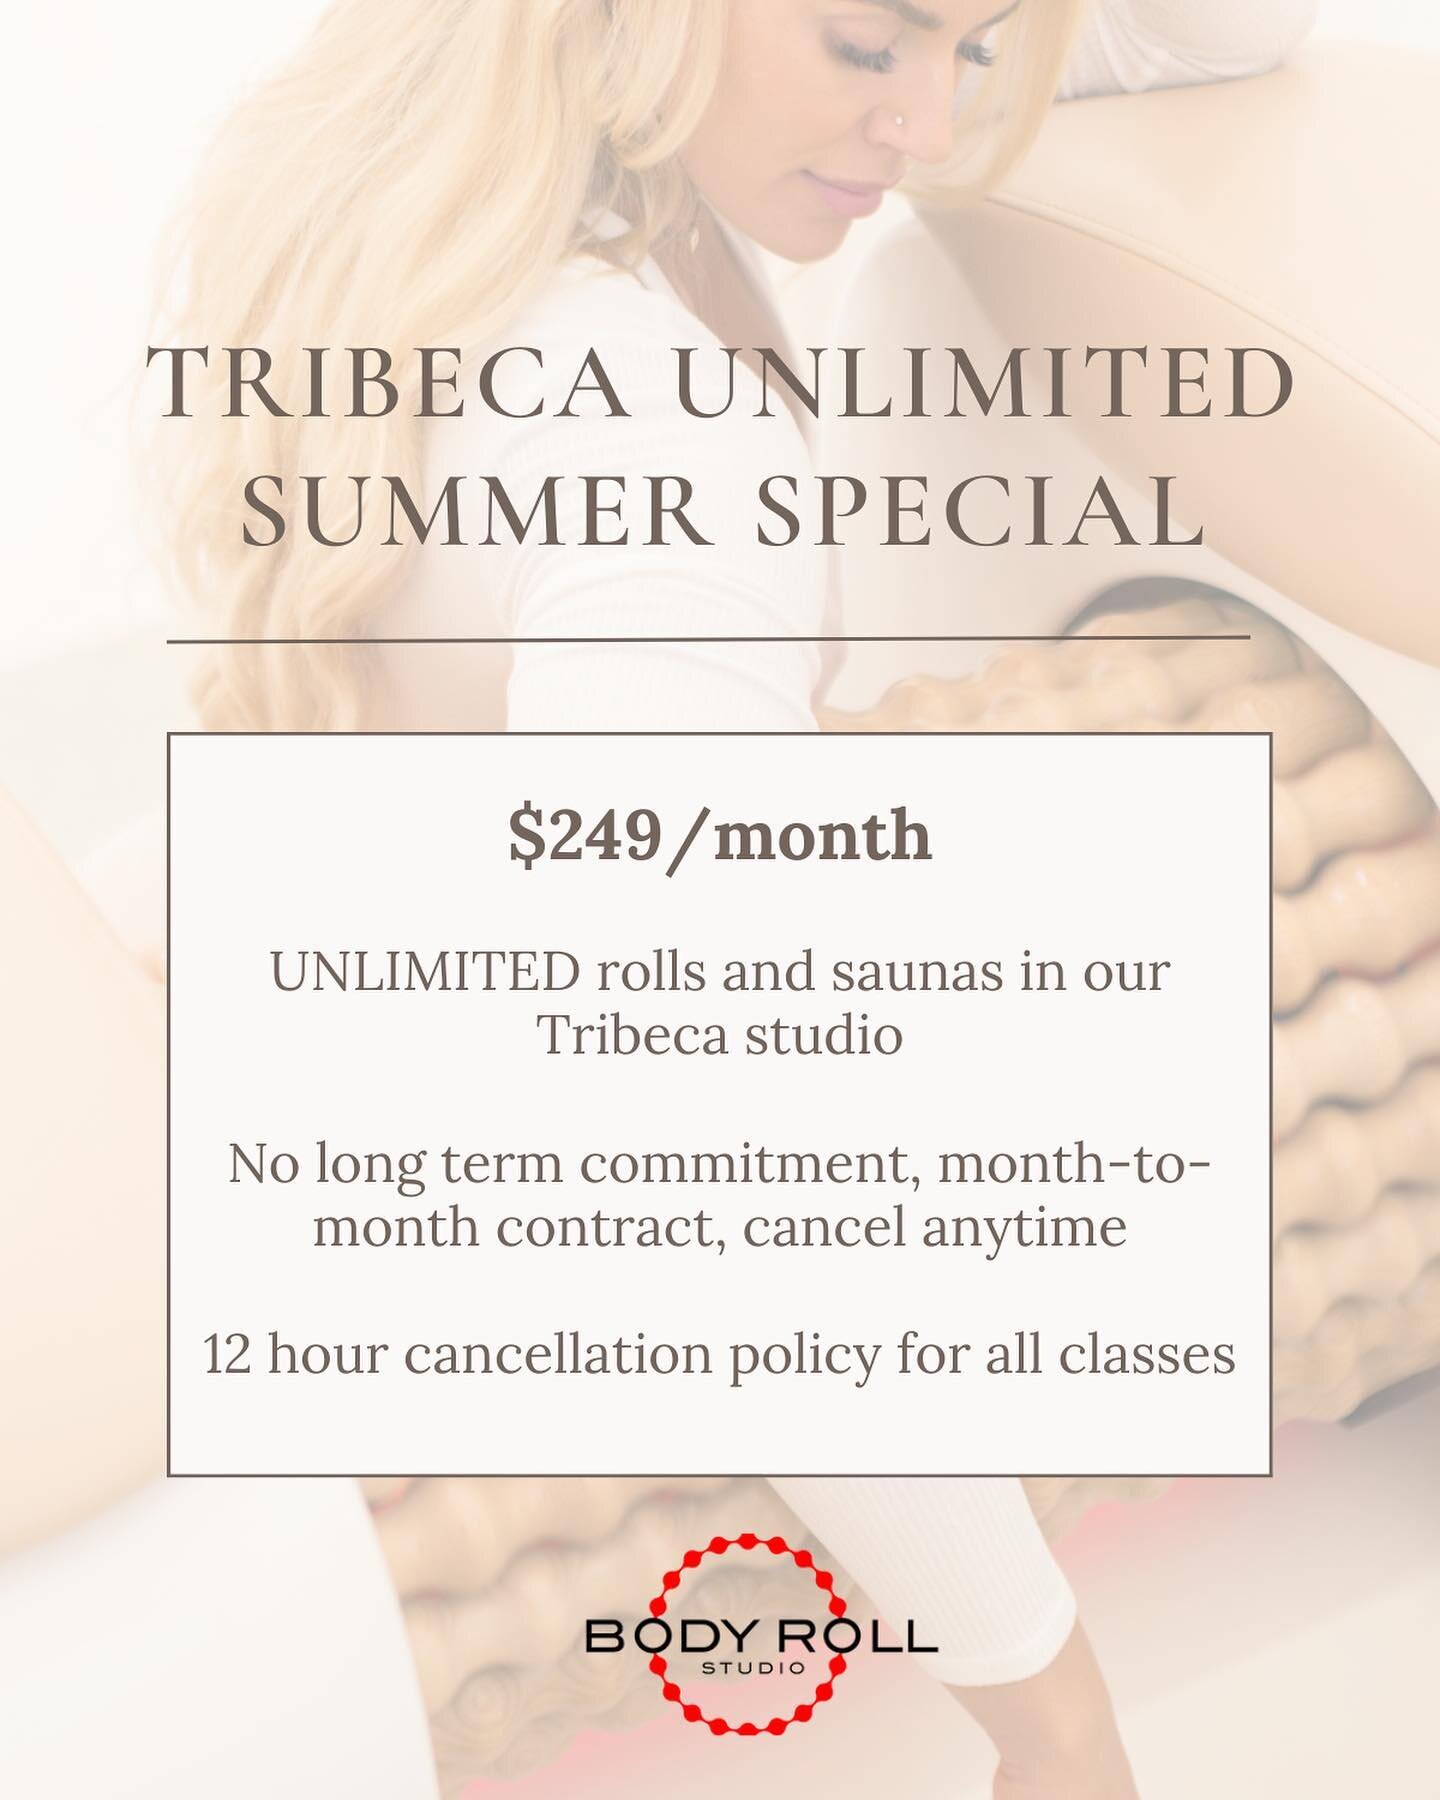 Afraid of commitment? Introducing our Summer special for our Tribeca studio. $249 a month for unlimited rolls and sauna sessions. Auto renewal without long term commitment.Member benefits includes. To sign up visit BodyRollStudio.com or our app Body 